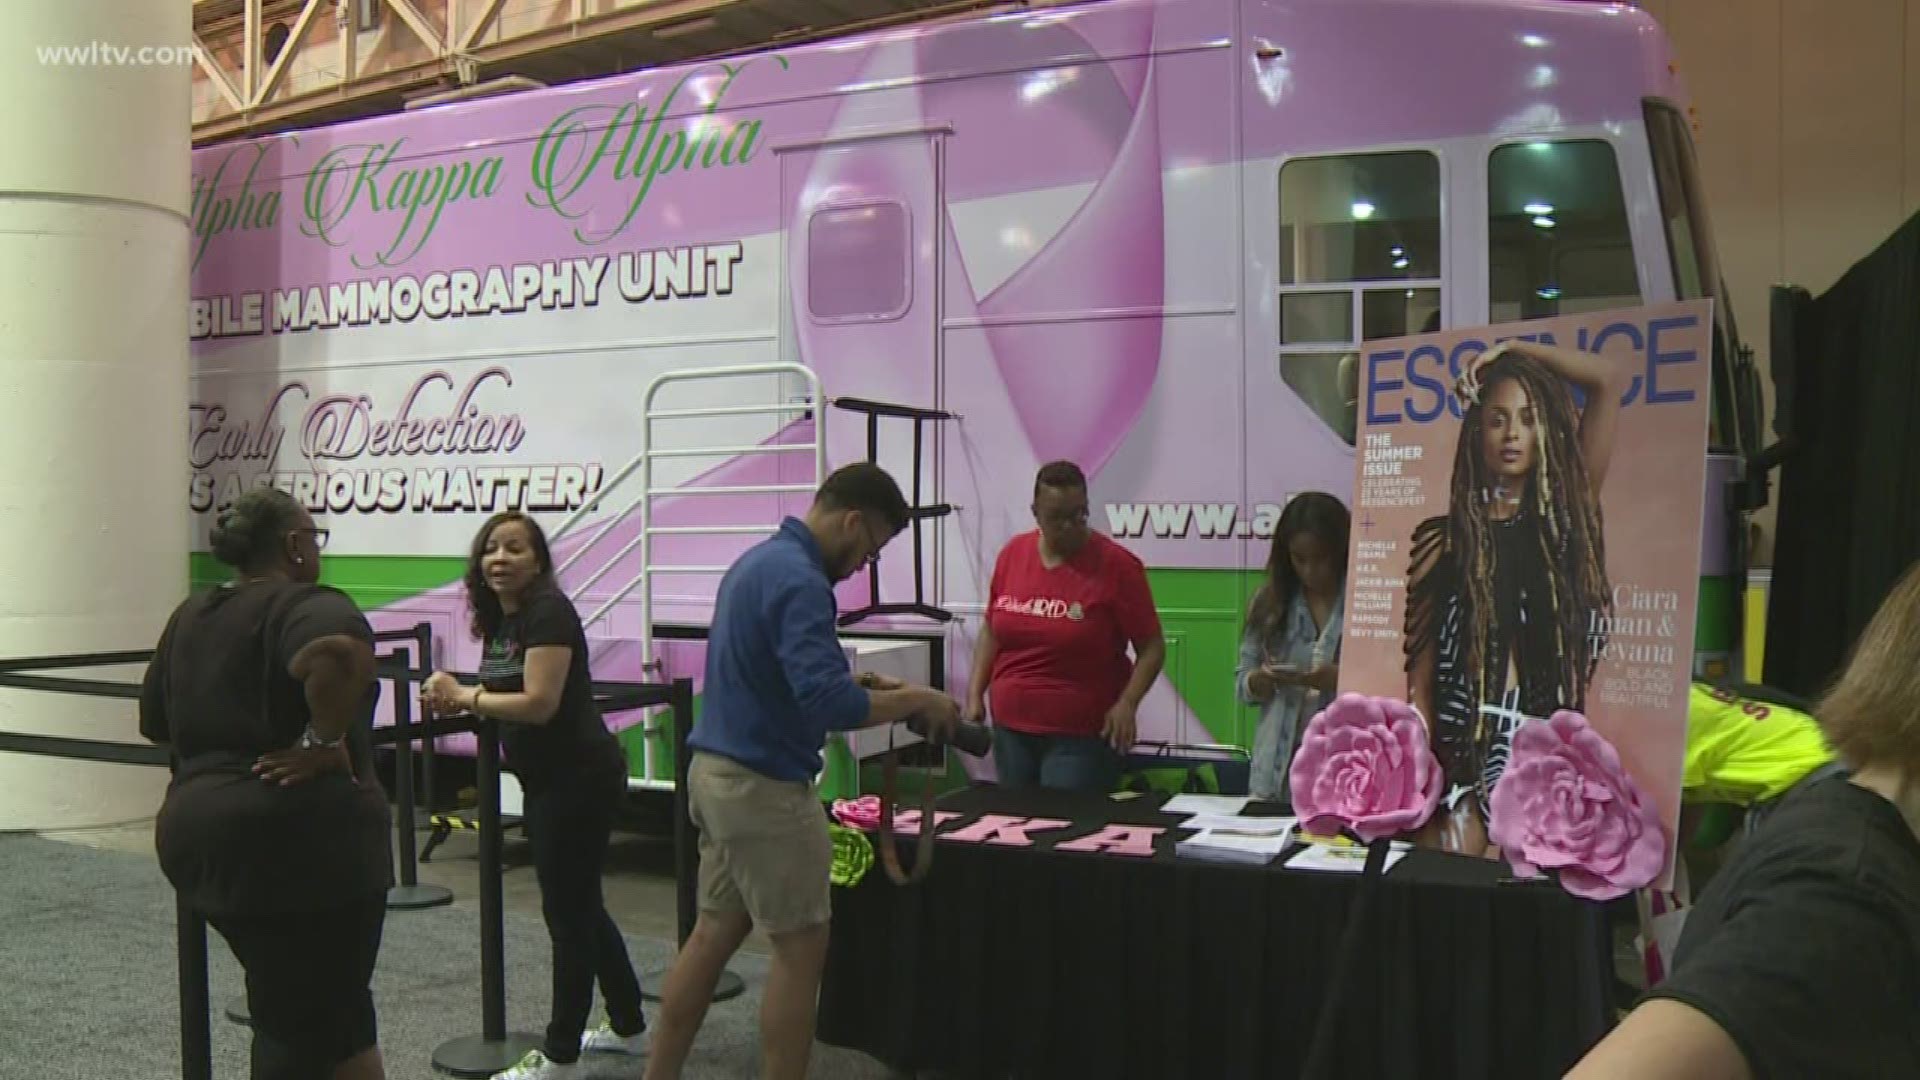 "So, we're really excited to be here at Essence. The 25th anniversary of Essence, not only celebrating their accomplishments but also making sure  that we promote Breast Cancer awareness," said Katina Semien with the organization.